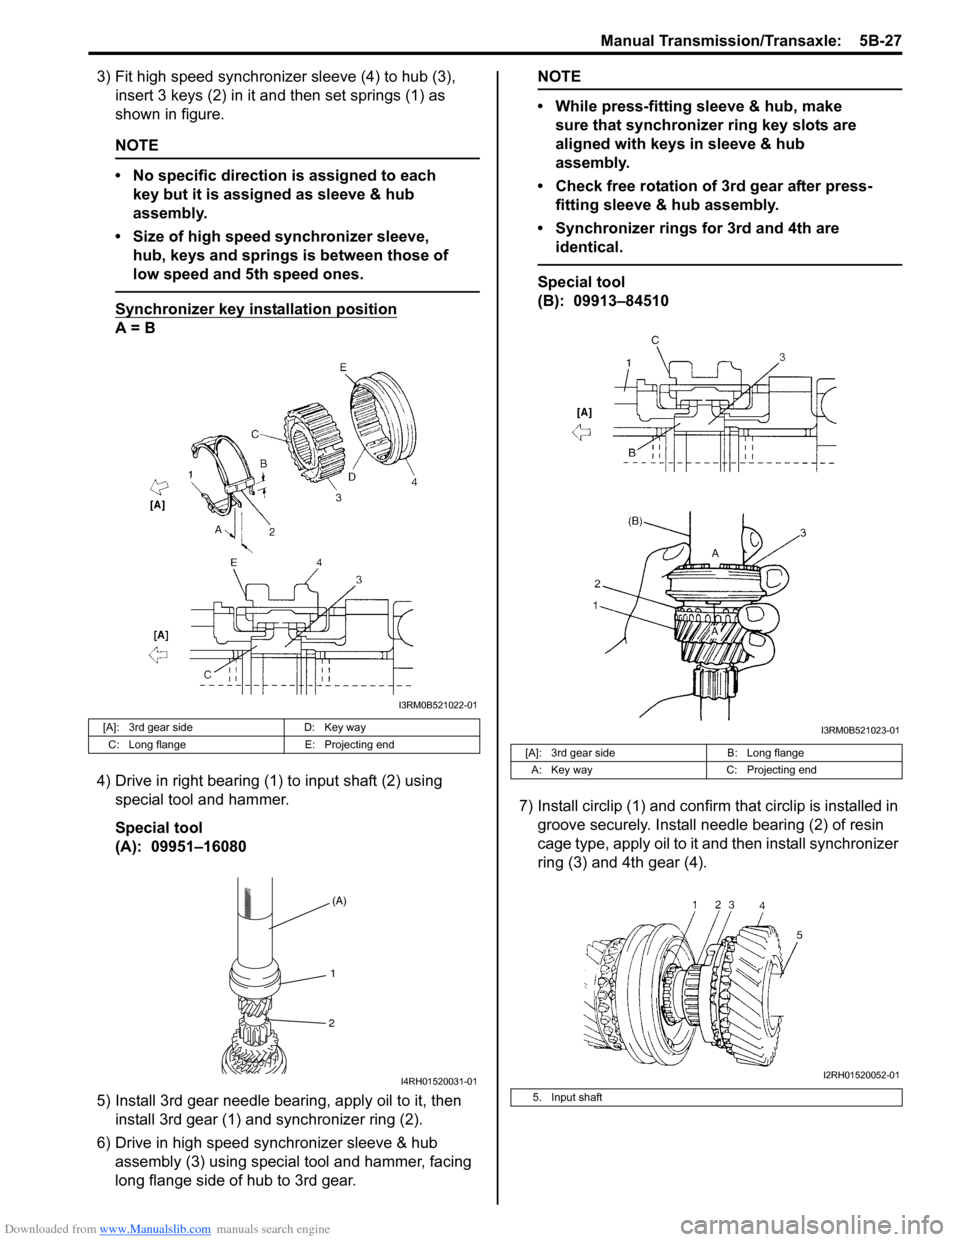 SUZUKI SWIFT 2006 2.G Service Owners Manual Downloaded from www.Manualslib.com manuals search engine Manual Transmission/Transaxle:  5B-27
3) Fit high speed synchronizer sleeve (4) to hub (3), insert 3 keys (2) in it and then set springs (1) as